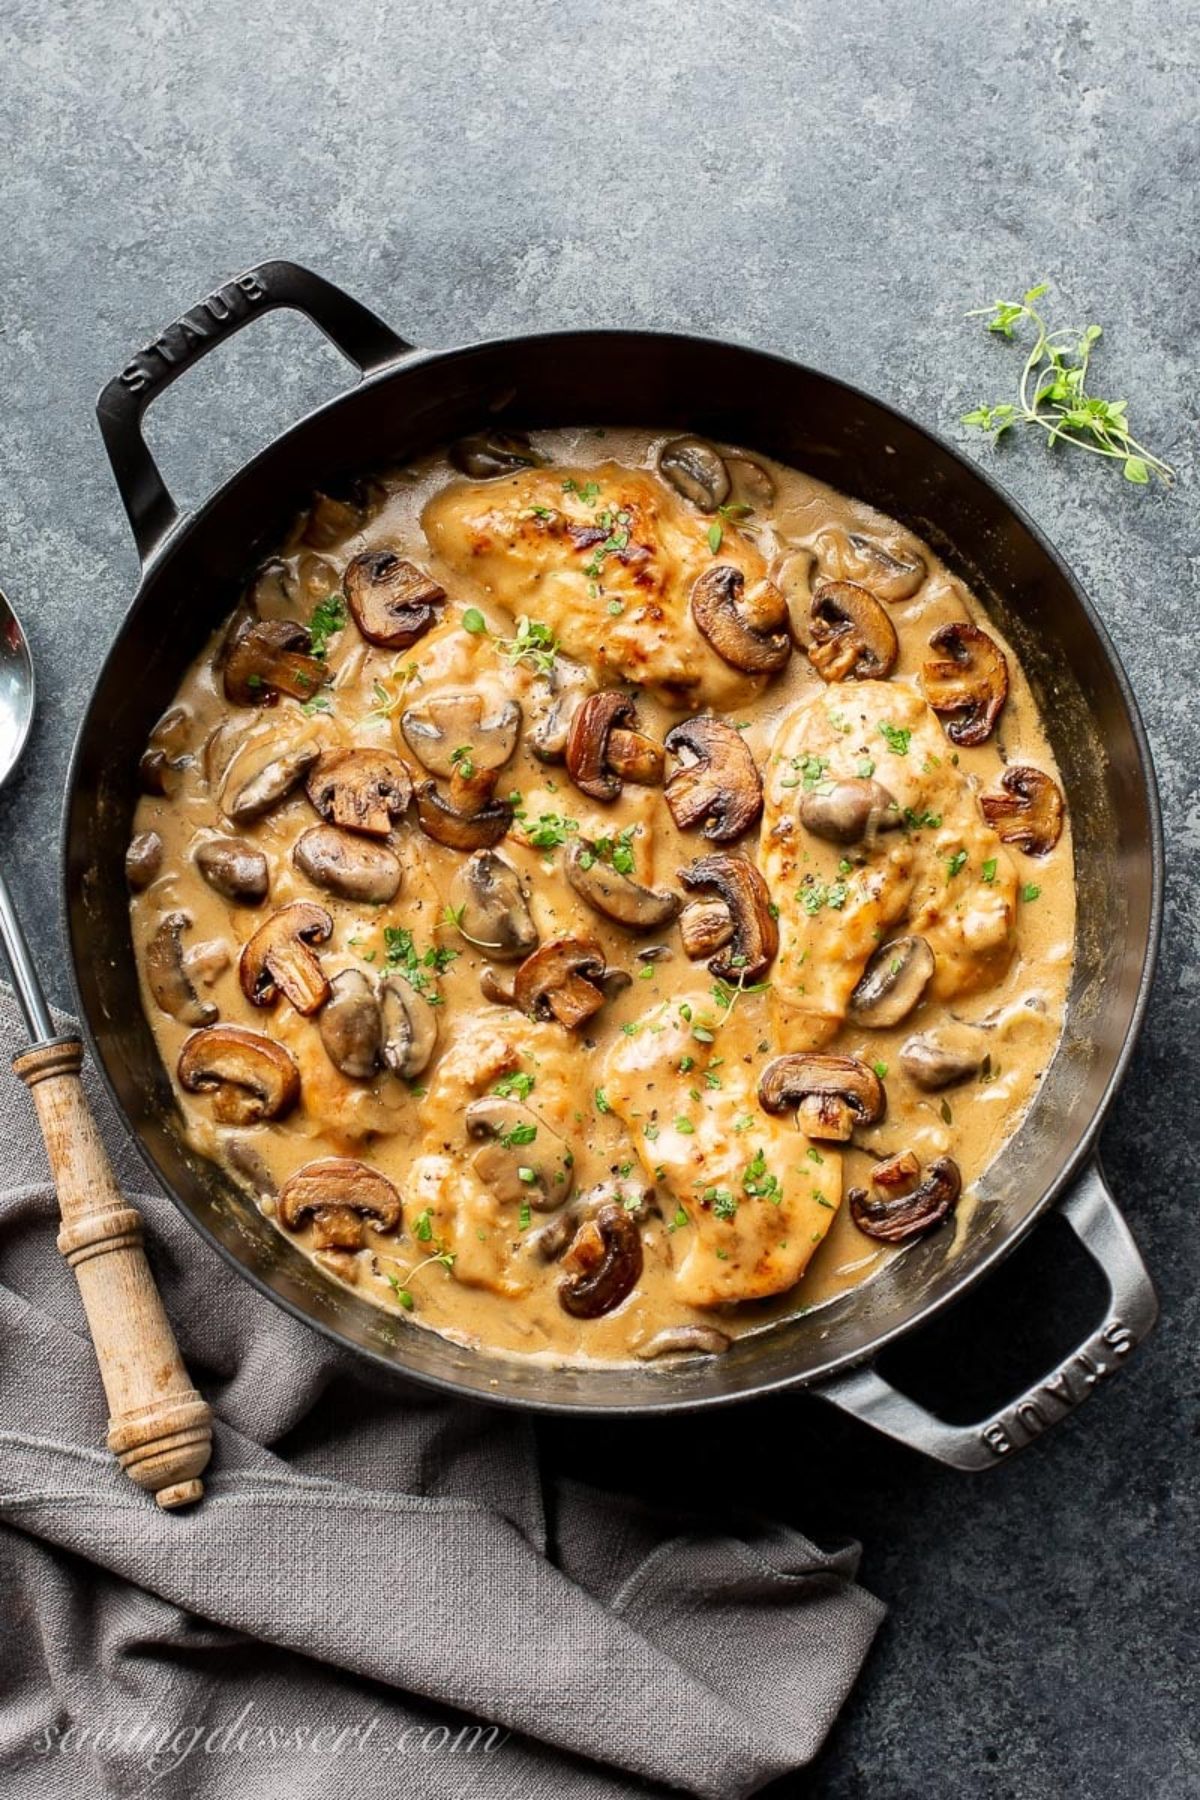 Mouth-watering chicken with mushroom wine sauce in a black skillet.